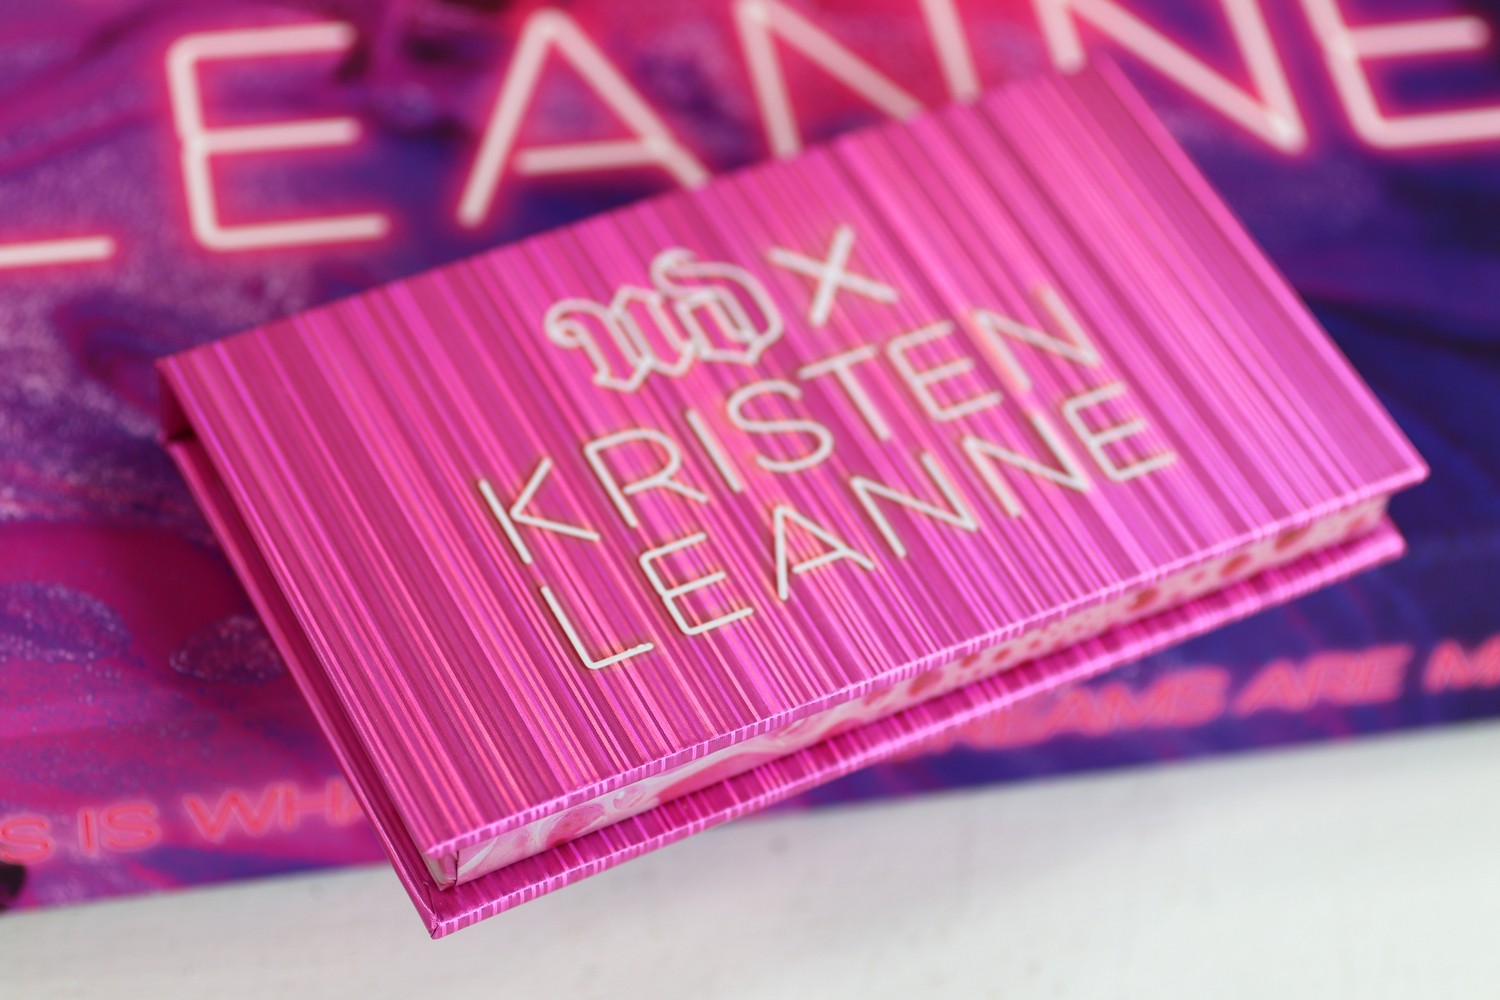 Urban Decay x Kristen Leanne Beauty Beam Highlighter Palette Review and Swatches